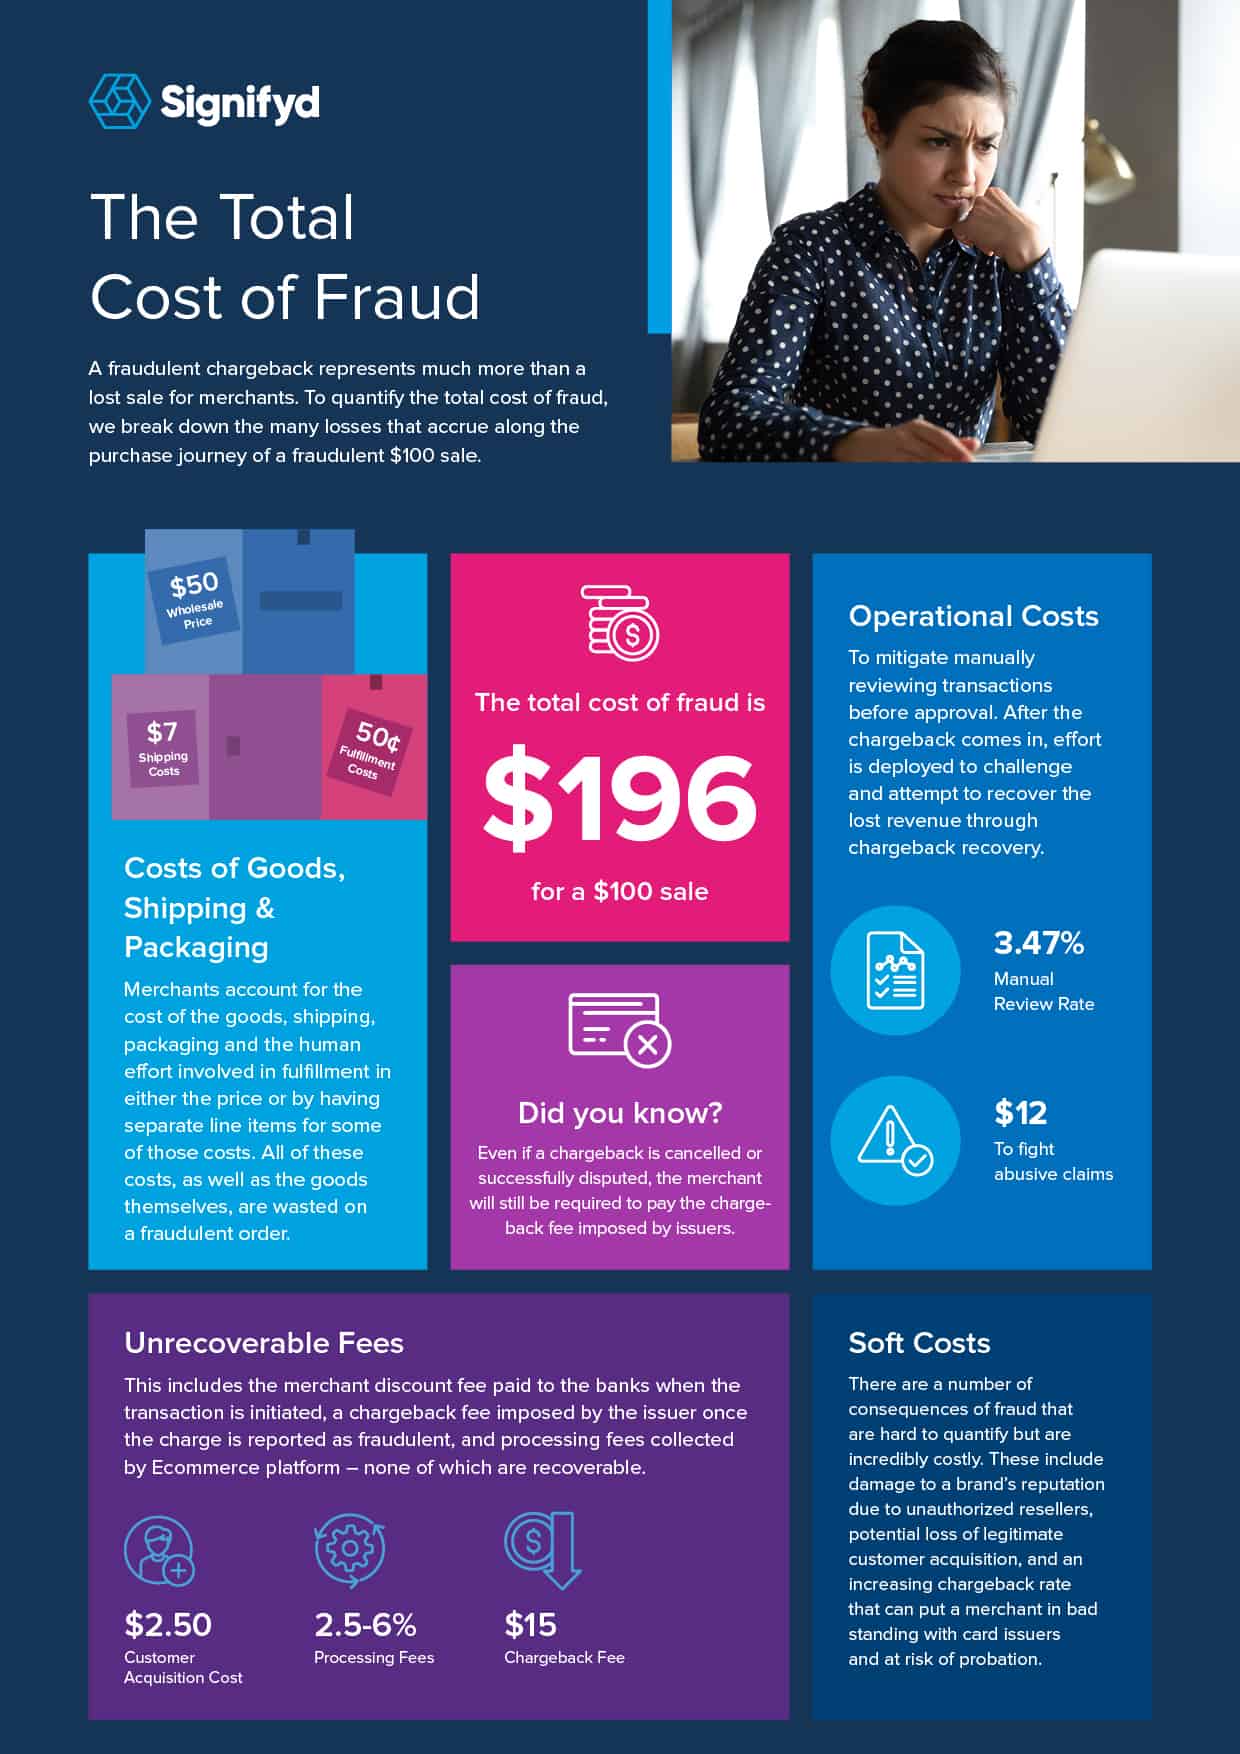 Infographic - The total cost of fraud is $196 for a $100 sale